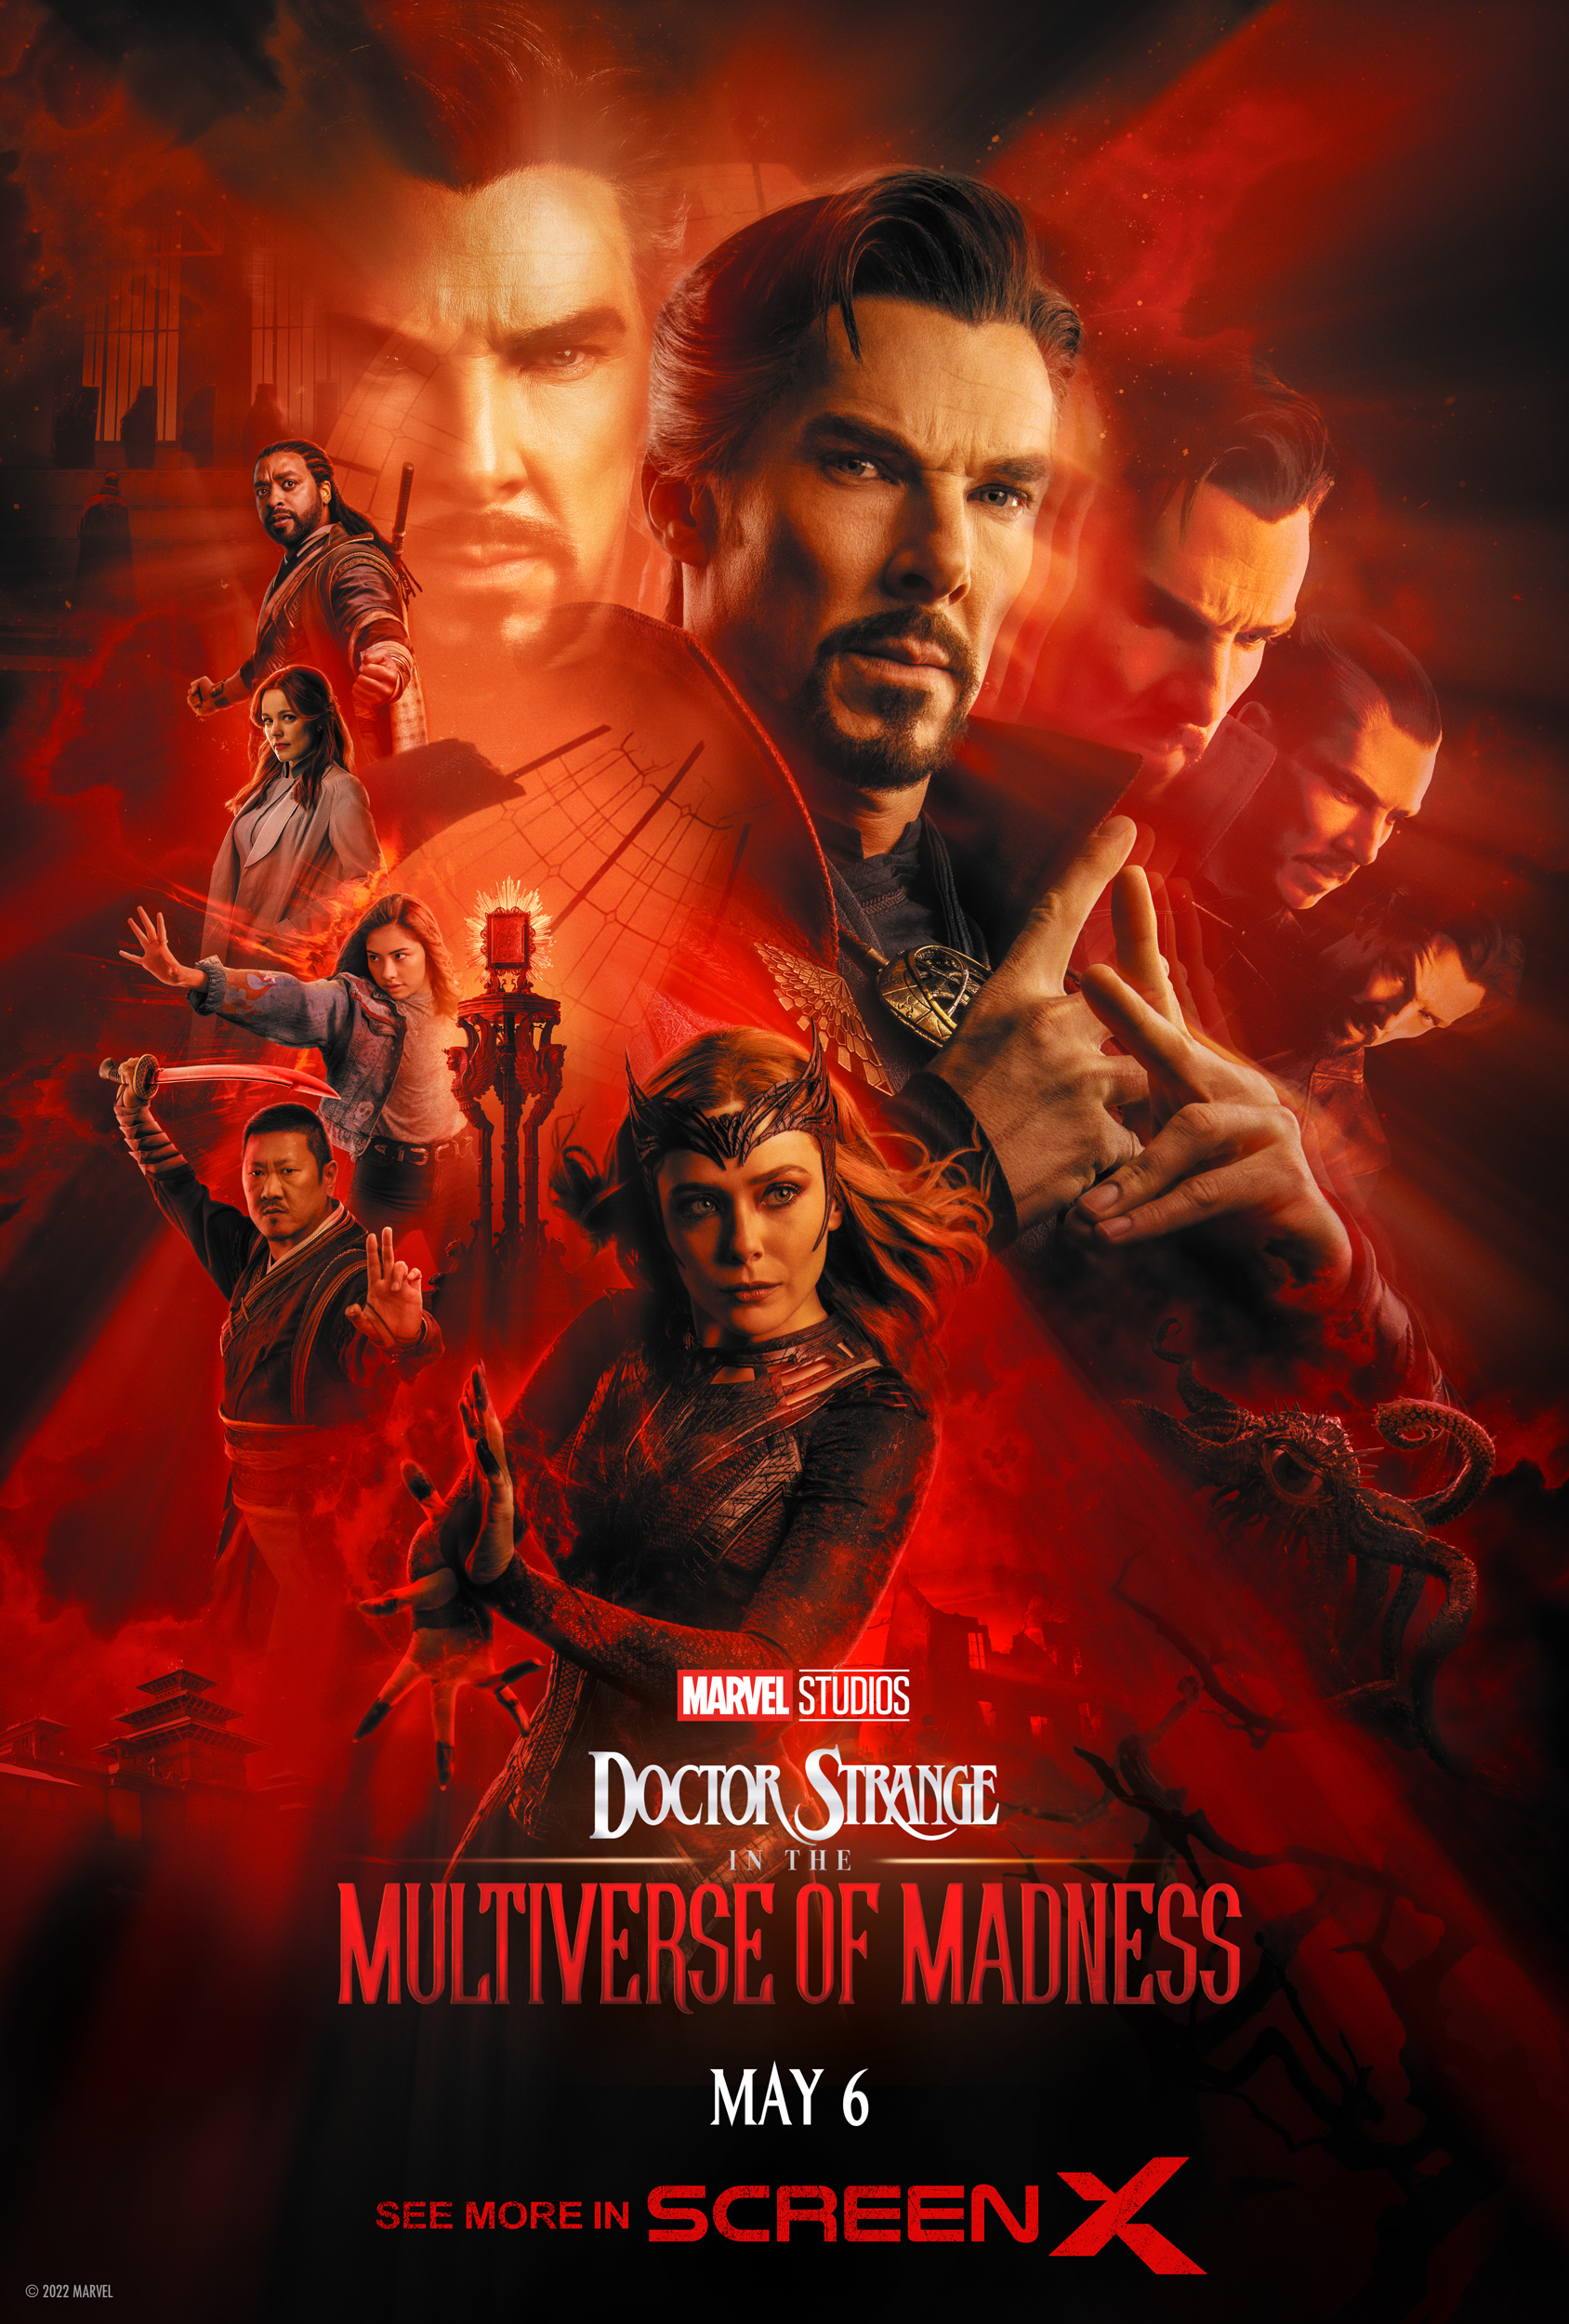 Doctor Strange in the Multiverse of Madness (2022) 1080p HDRip x264 ESubs ORG. [Dual Audio] [Hindi or English] [2.2GB] Full Hollywood Movie Hindi